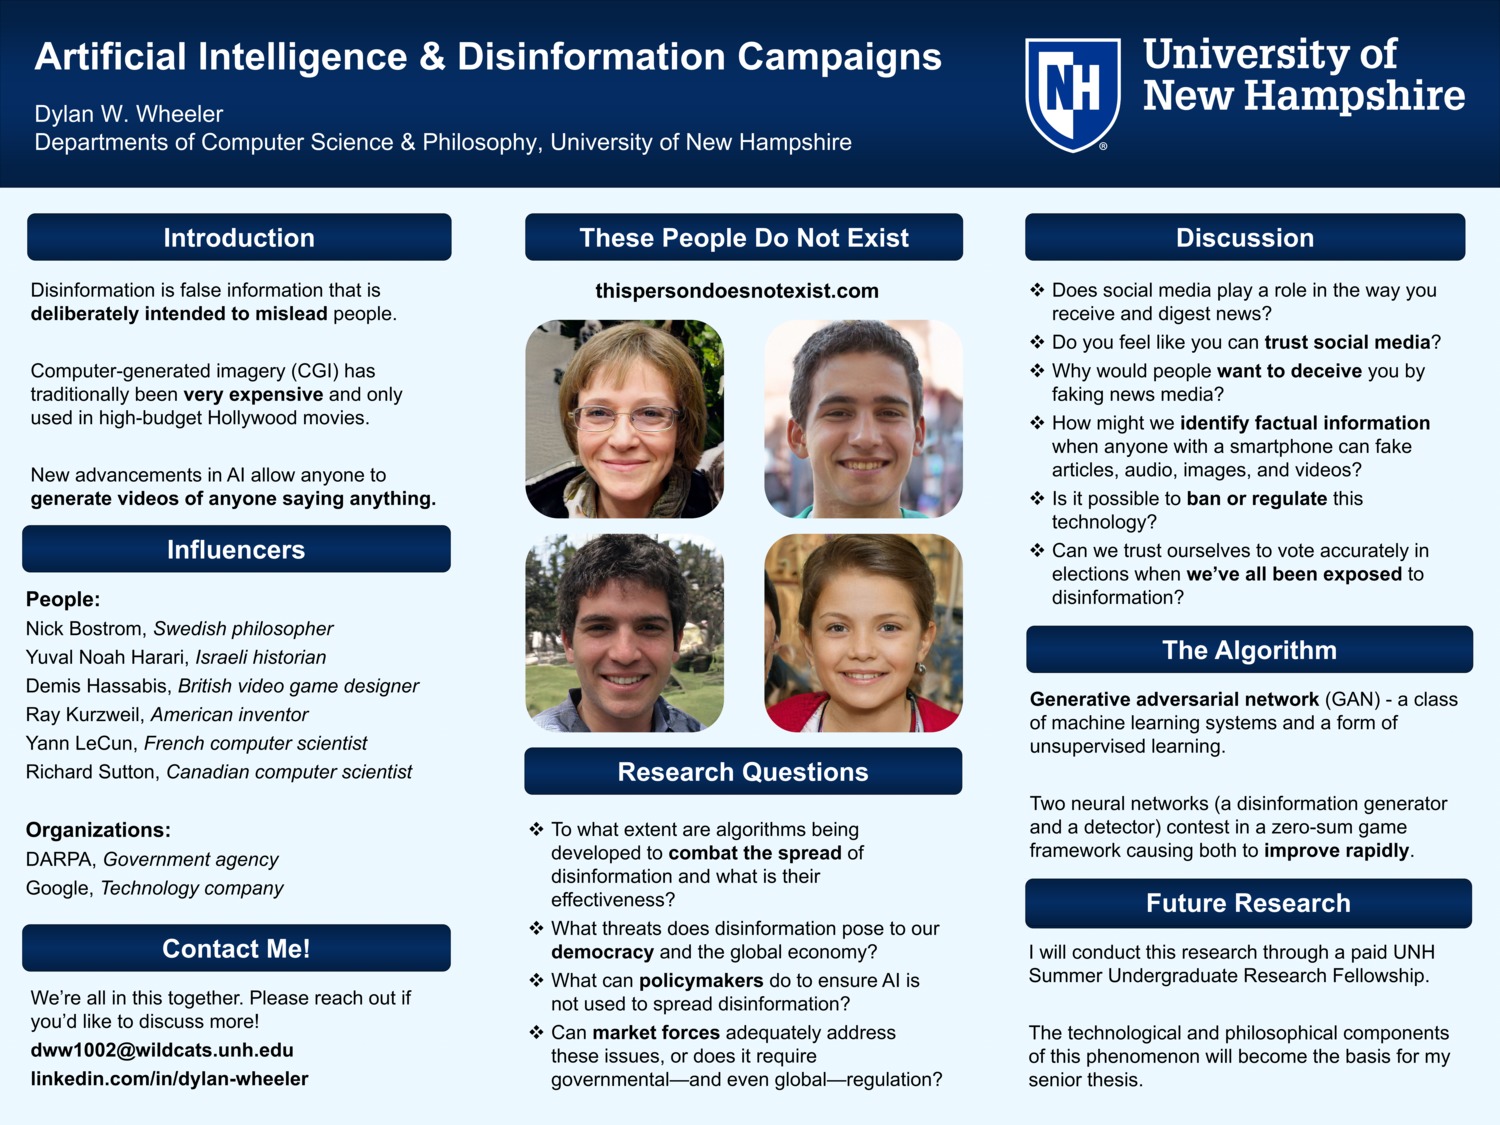 Artificial Intelligence & Disinformation Campaigns by dww1002